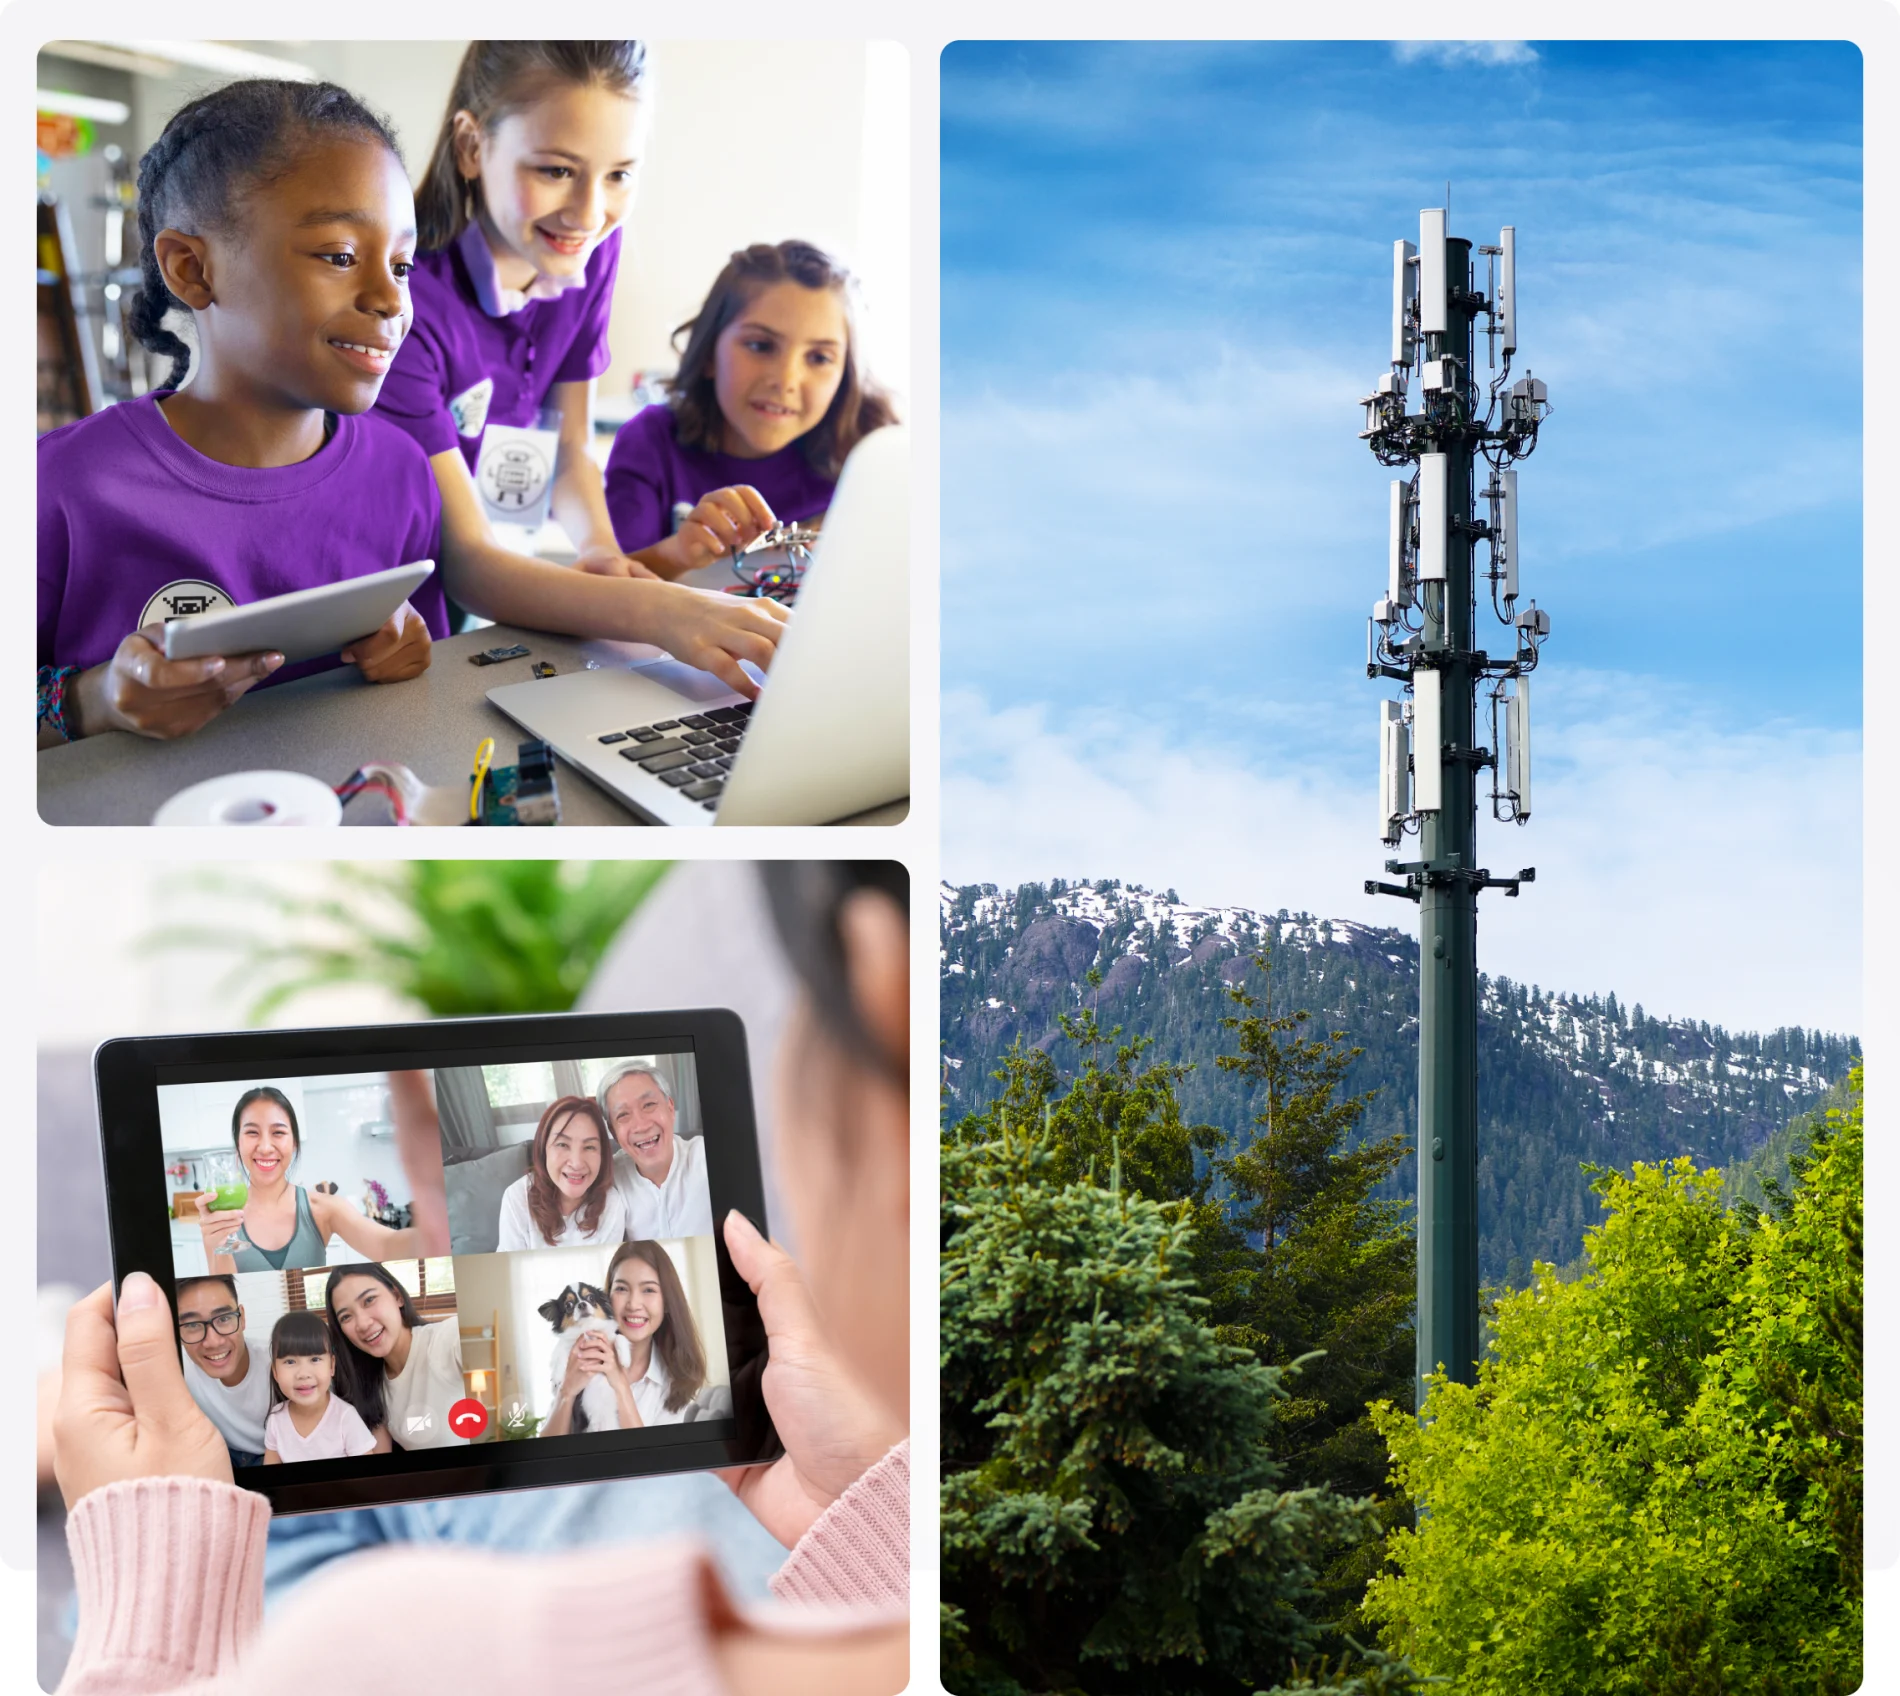 A collage of images, including: (top left) children interacting with a laptop, (bottom left) a person interacting with relatives on a tablet and (right) a cell tower located in mountainous terrain